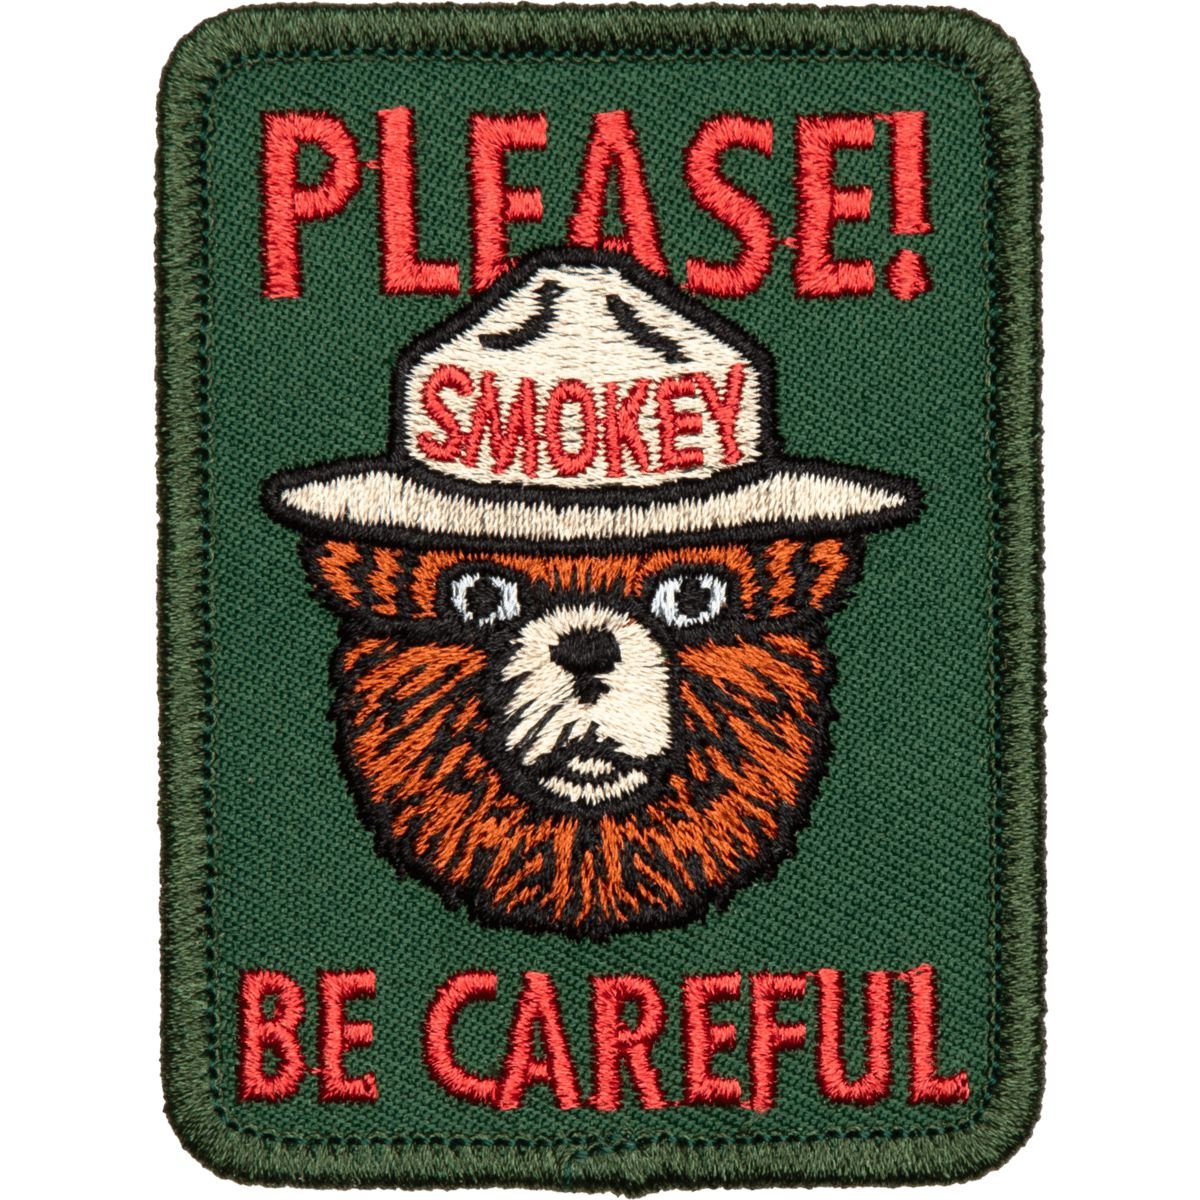 Be Careful Embroidered Patch